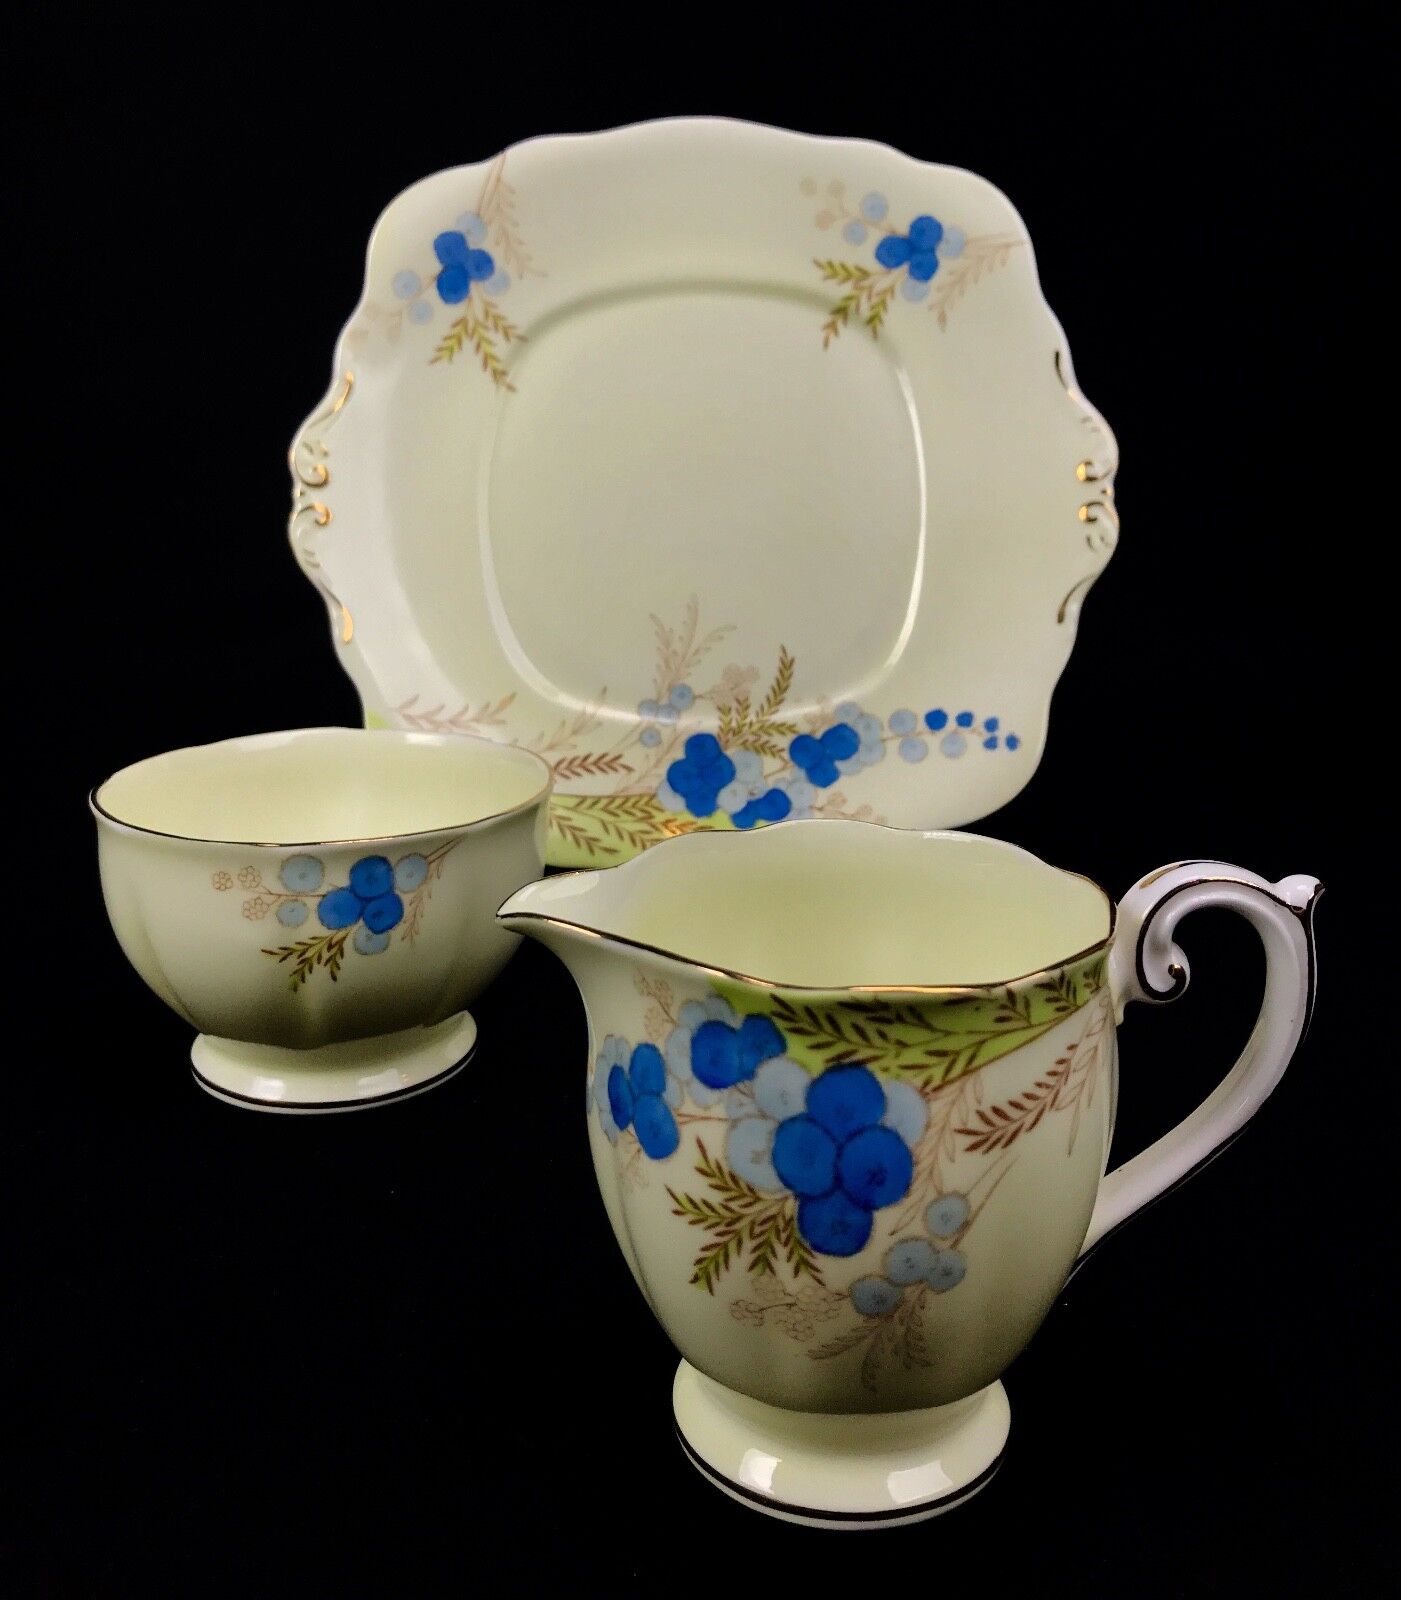 Vintage Bell China Tea Set for 6 People / 21 Piece / Blue And Cream 1940's